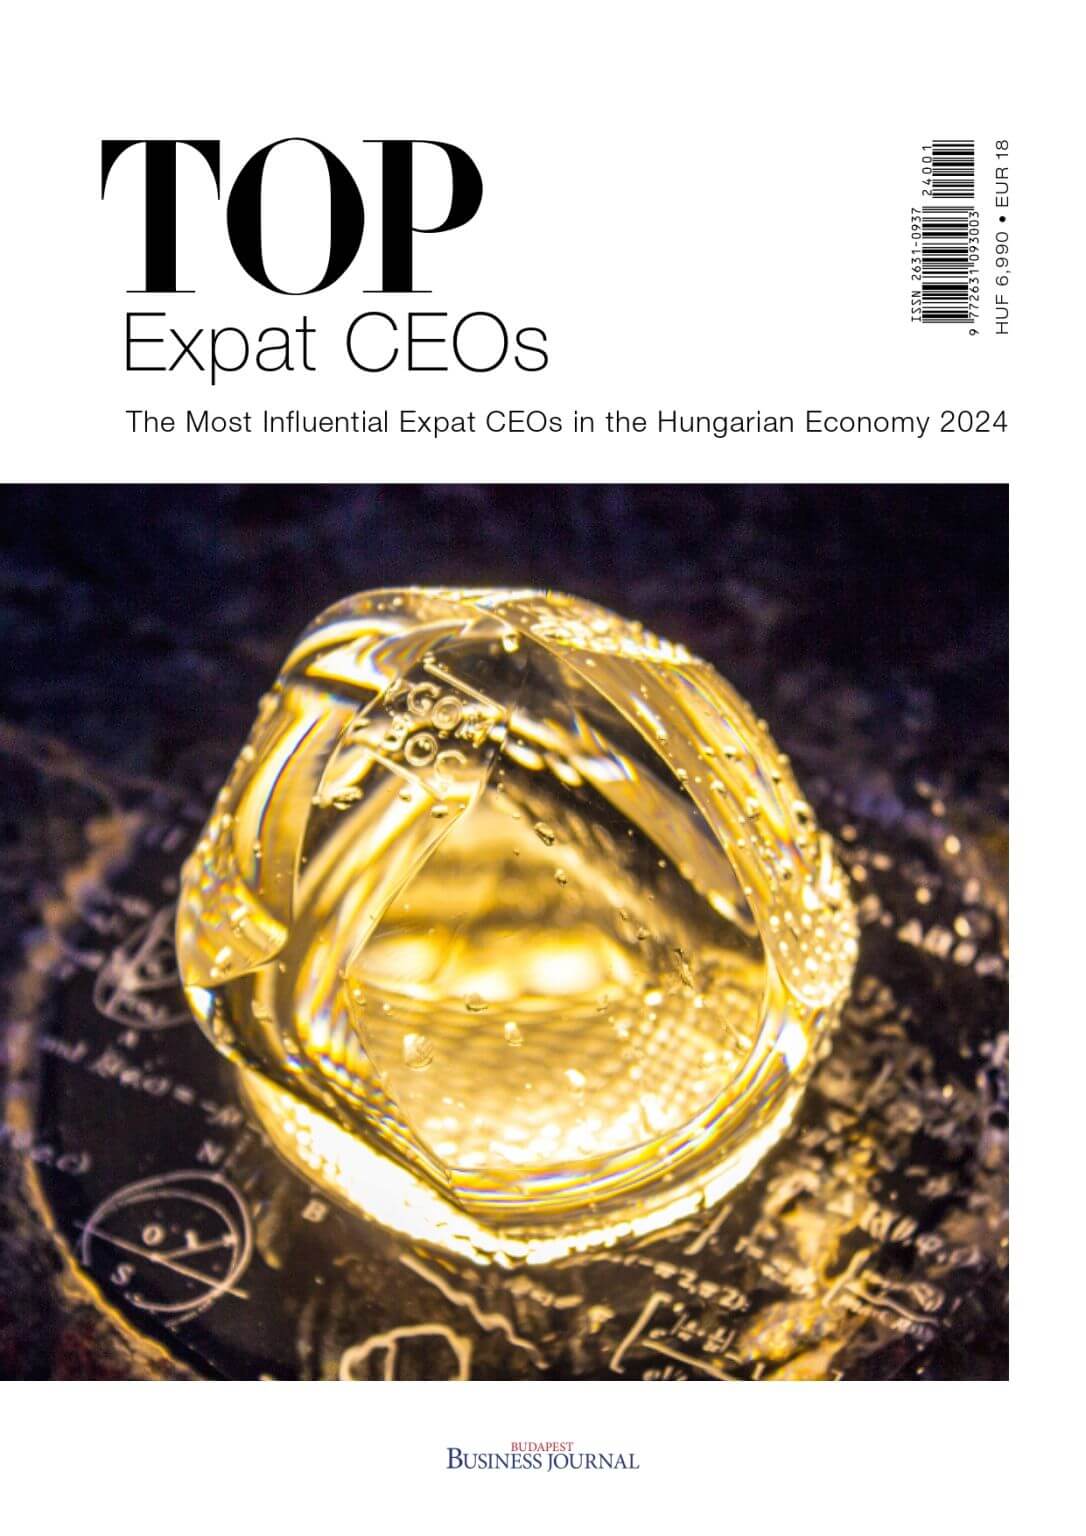 The Most Influential Expat CEOs in the Hungarian Economy 2024